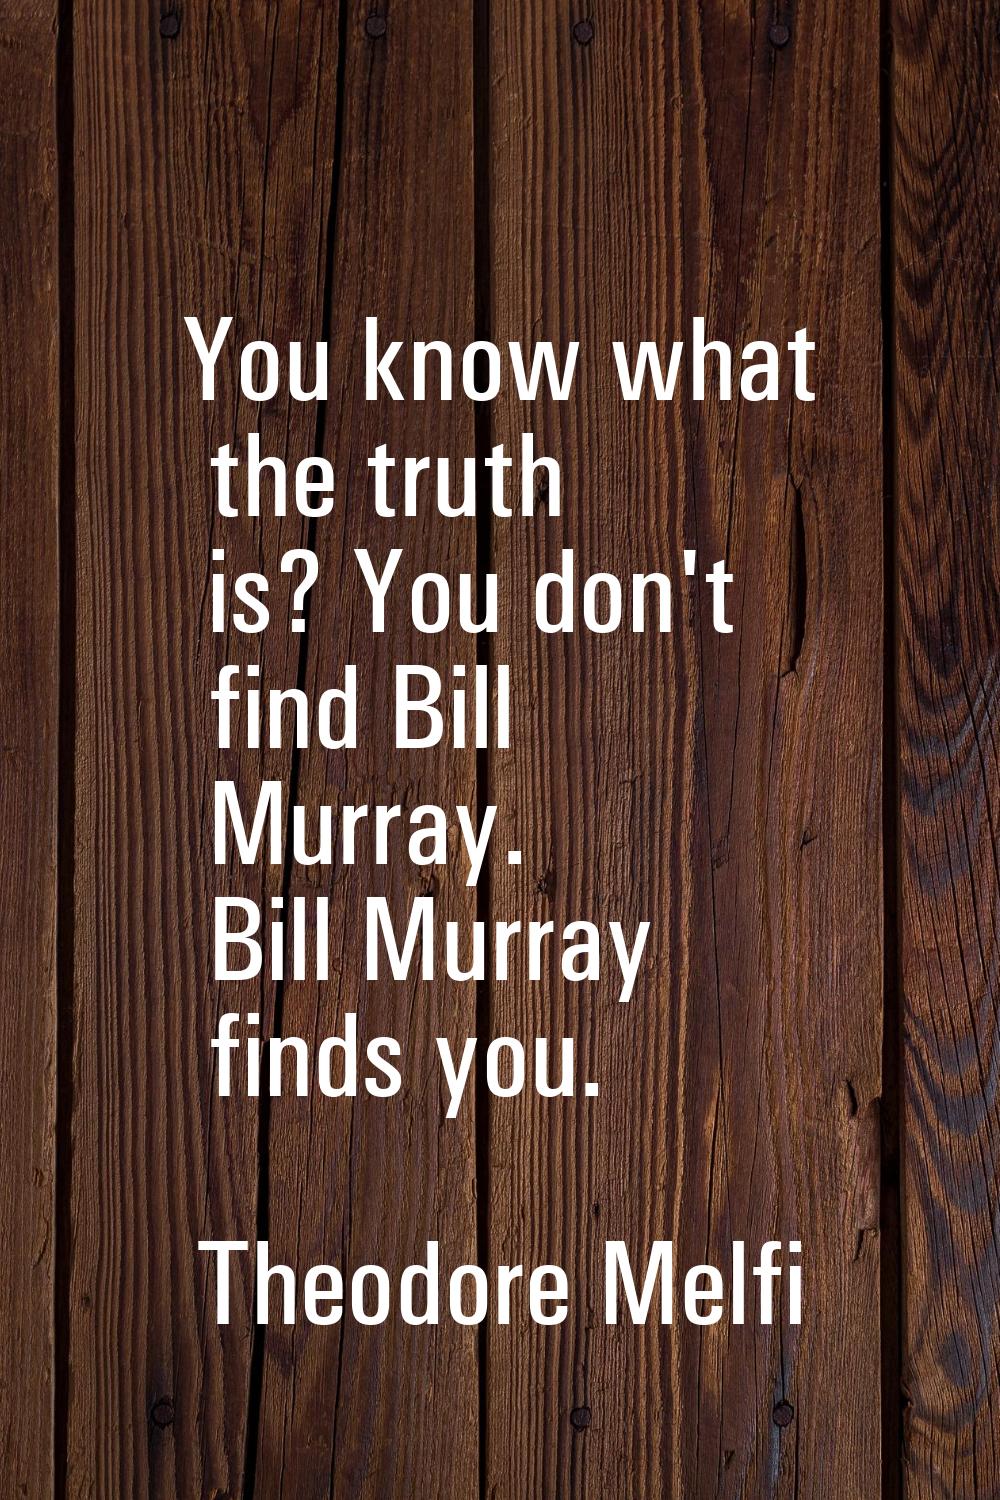 You know what the truth is? You don't find Bill Murray. Bill Murray finds you.